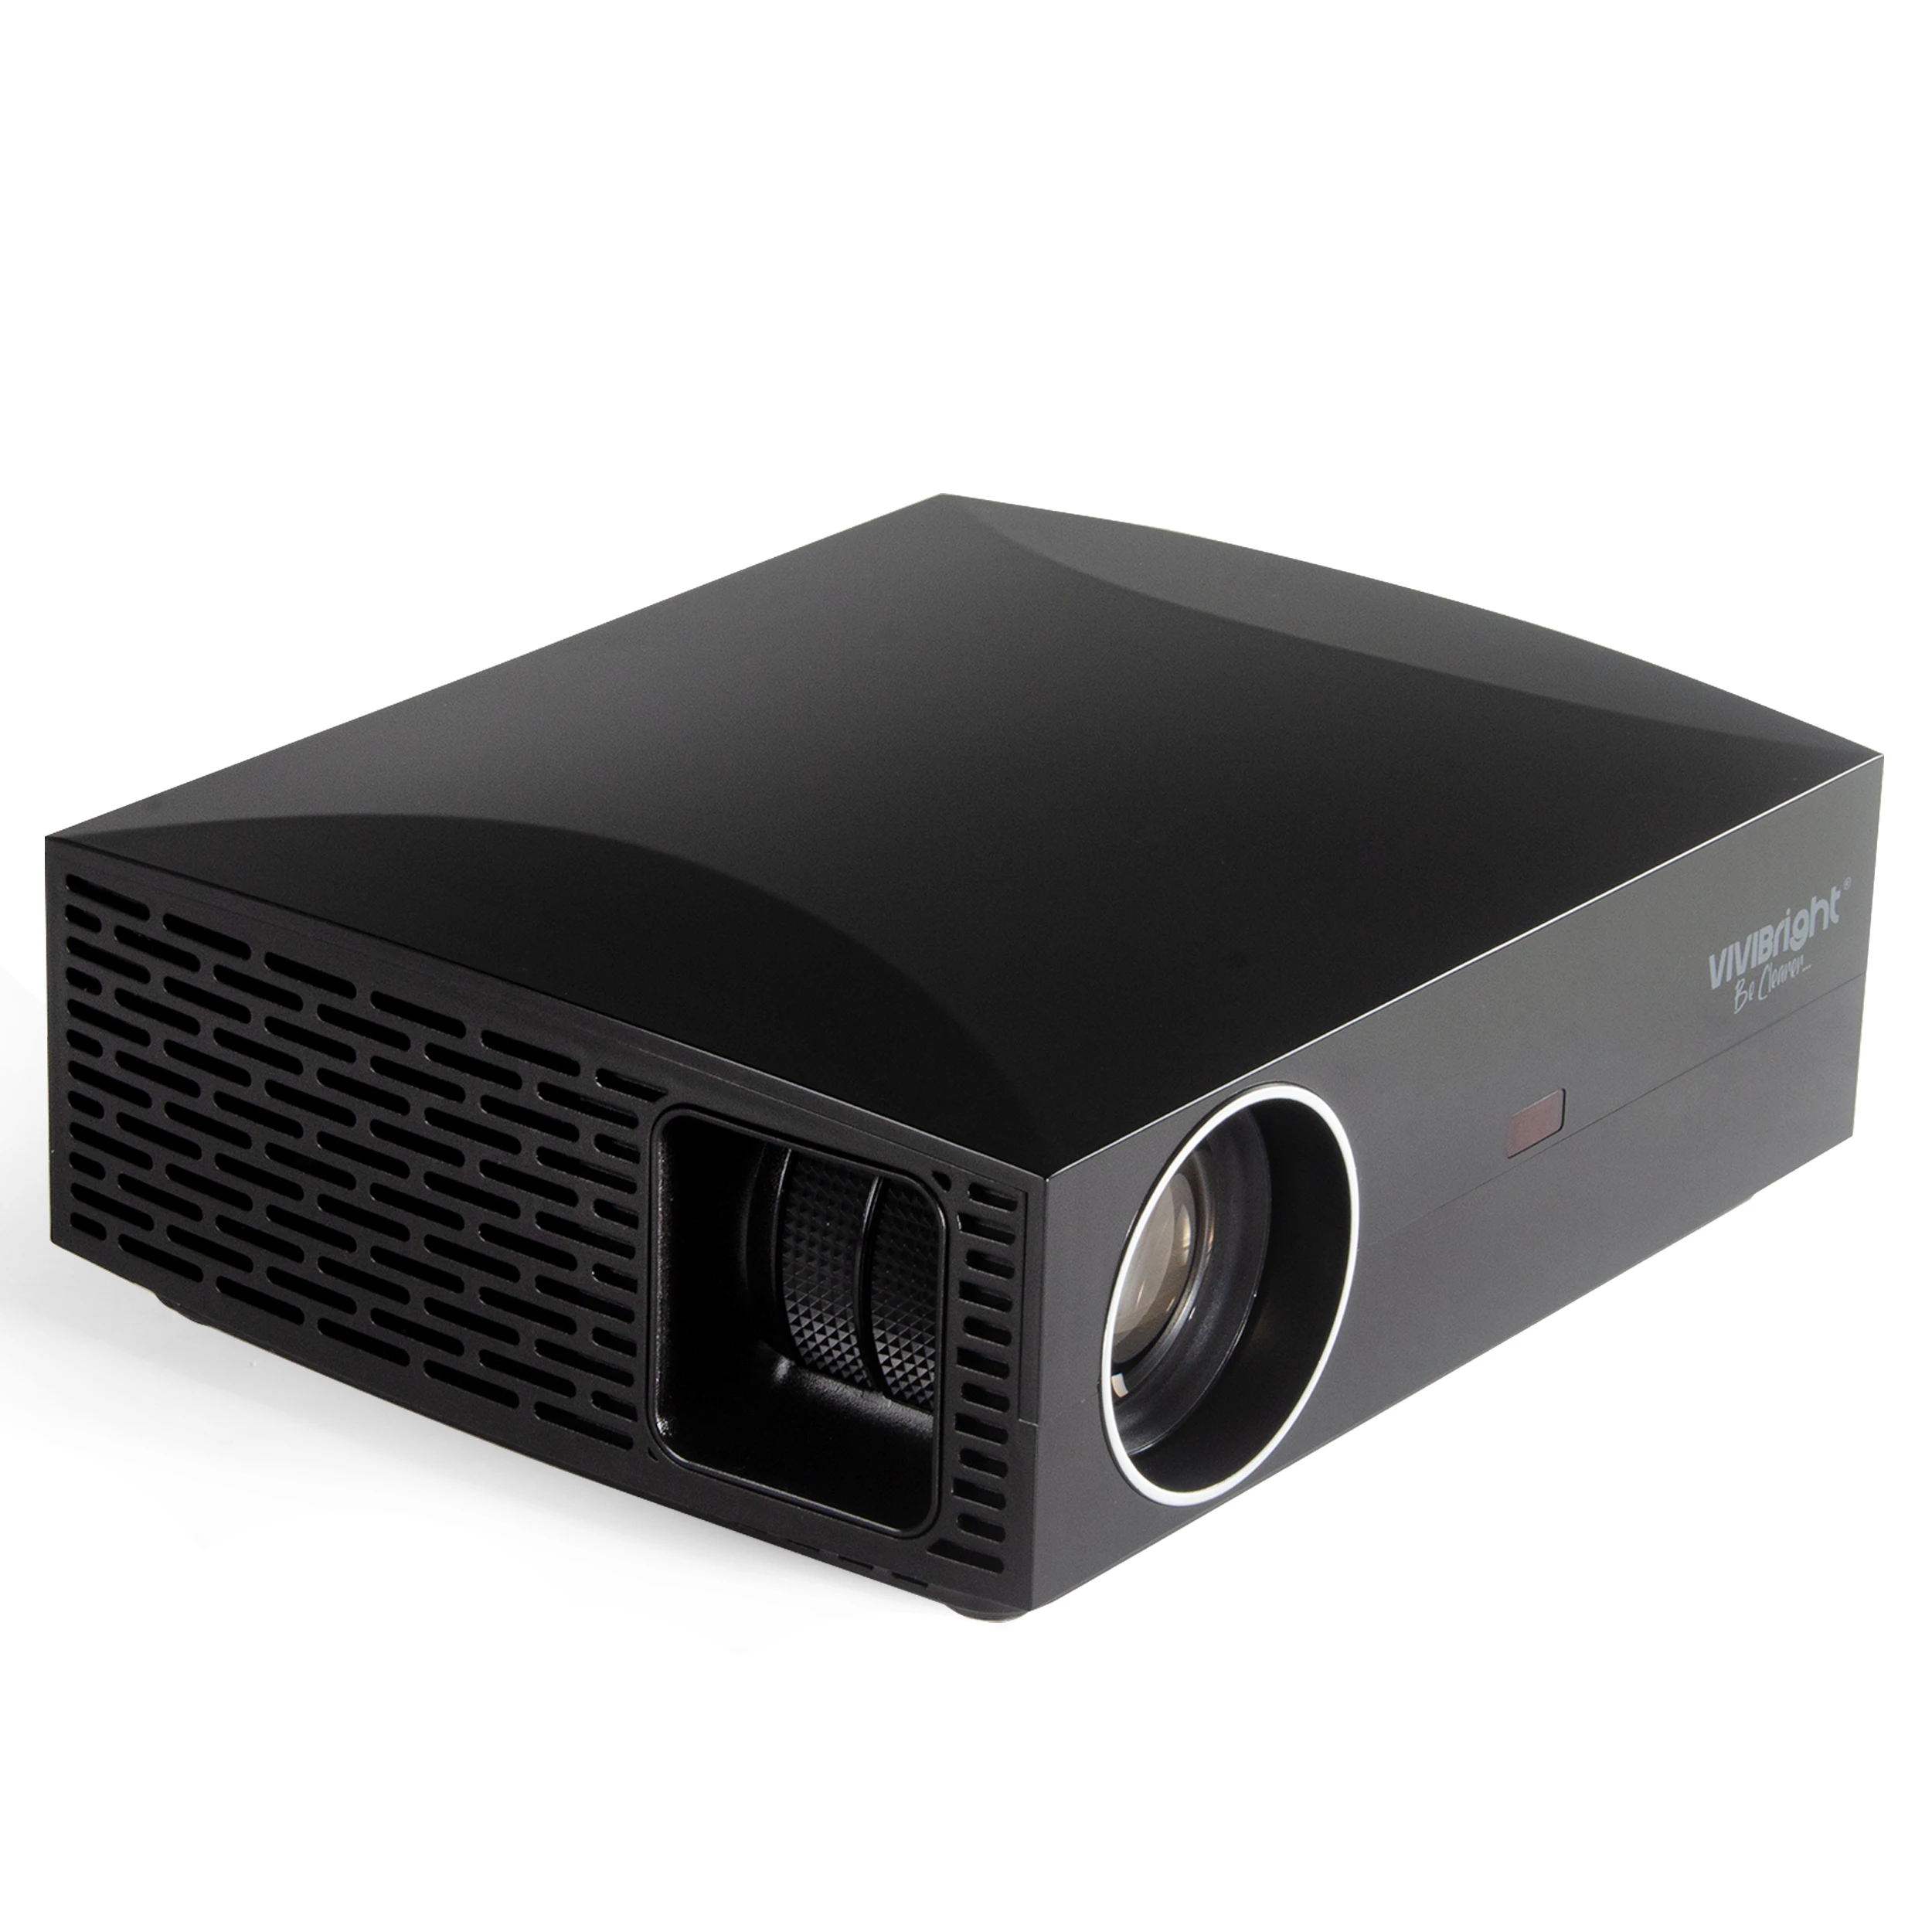 

Newest model F30 vivibright 4k led mobile pico video projector 1080P far better than Rigal projector